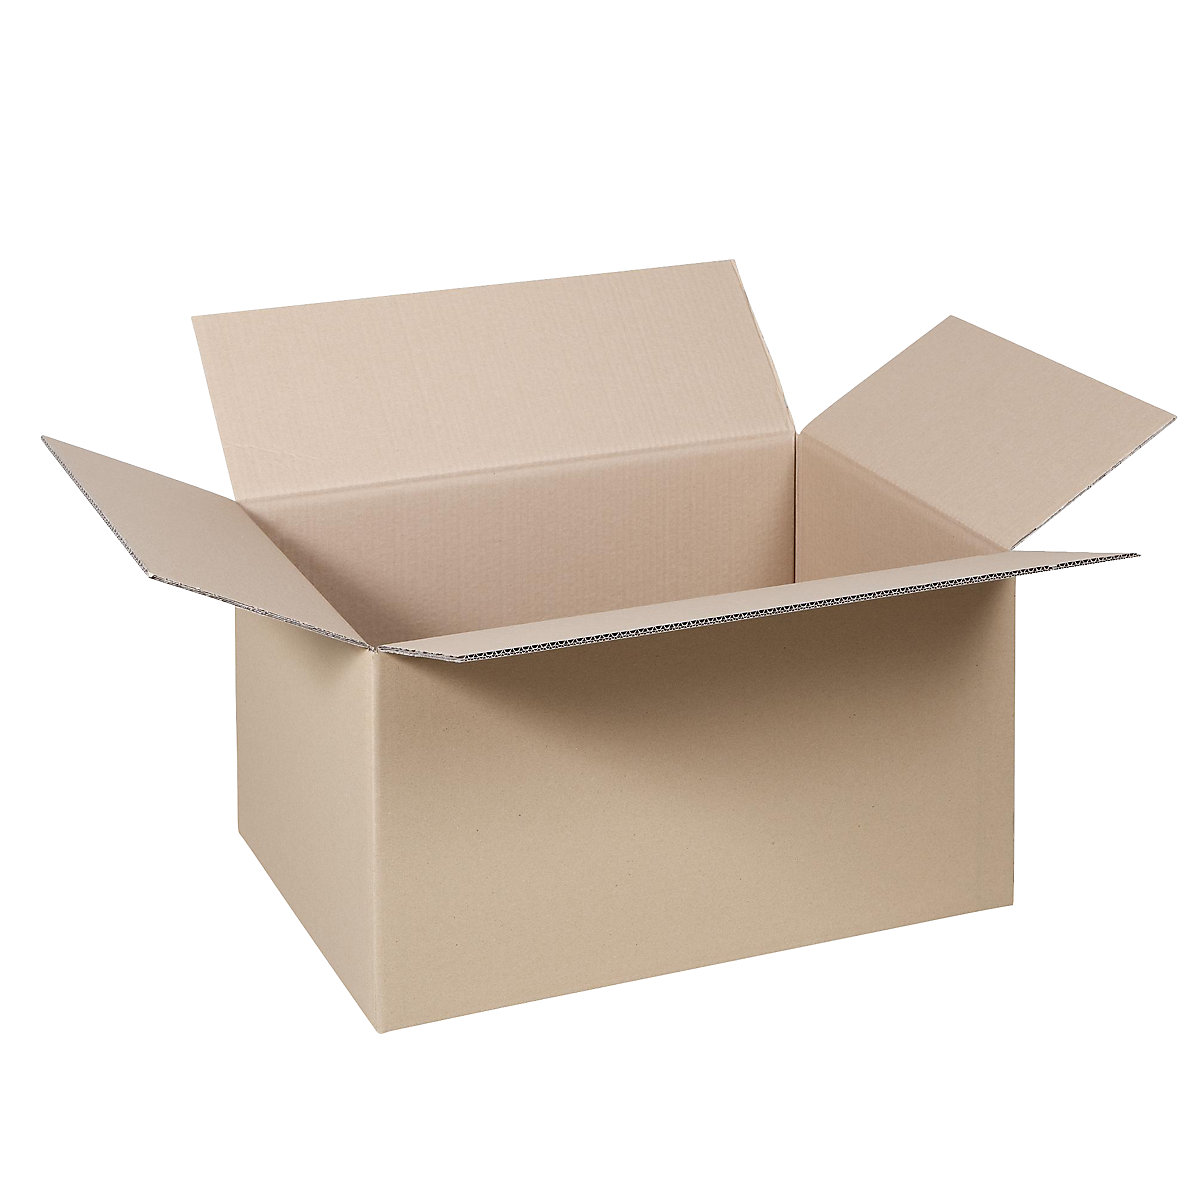 Folding cardboard box, FEFCO 0201, made of double fluted cardboard, internal dimensions 400 x 325 x 273 mm, pack of 50-35